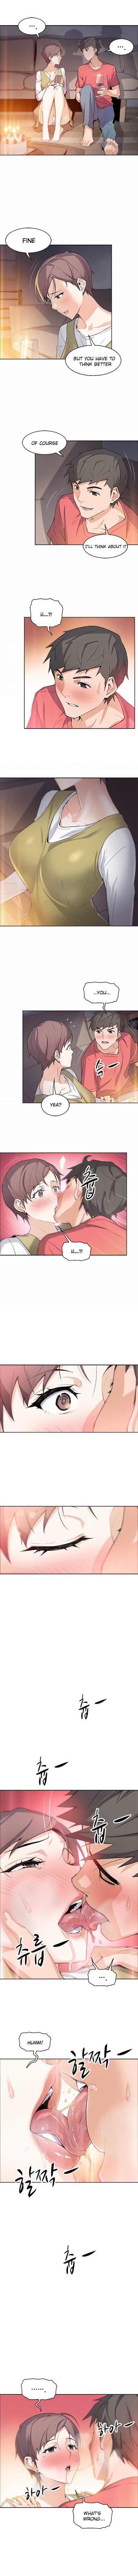 Masturbate Housekeeper [Neck Pillow, Paper] Ch.49/49 [English] [Manhwa PDF] Completed Blowjob Contest - Page 5